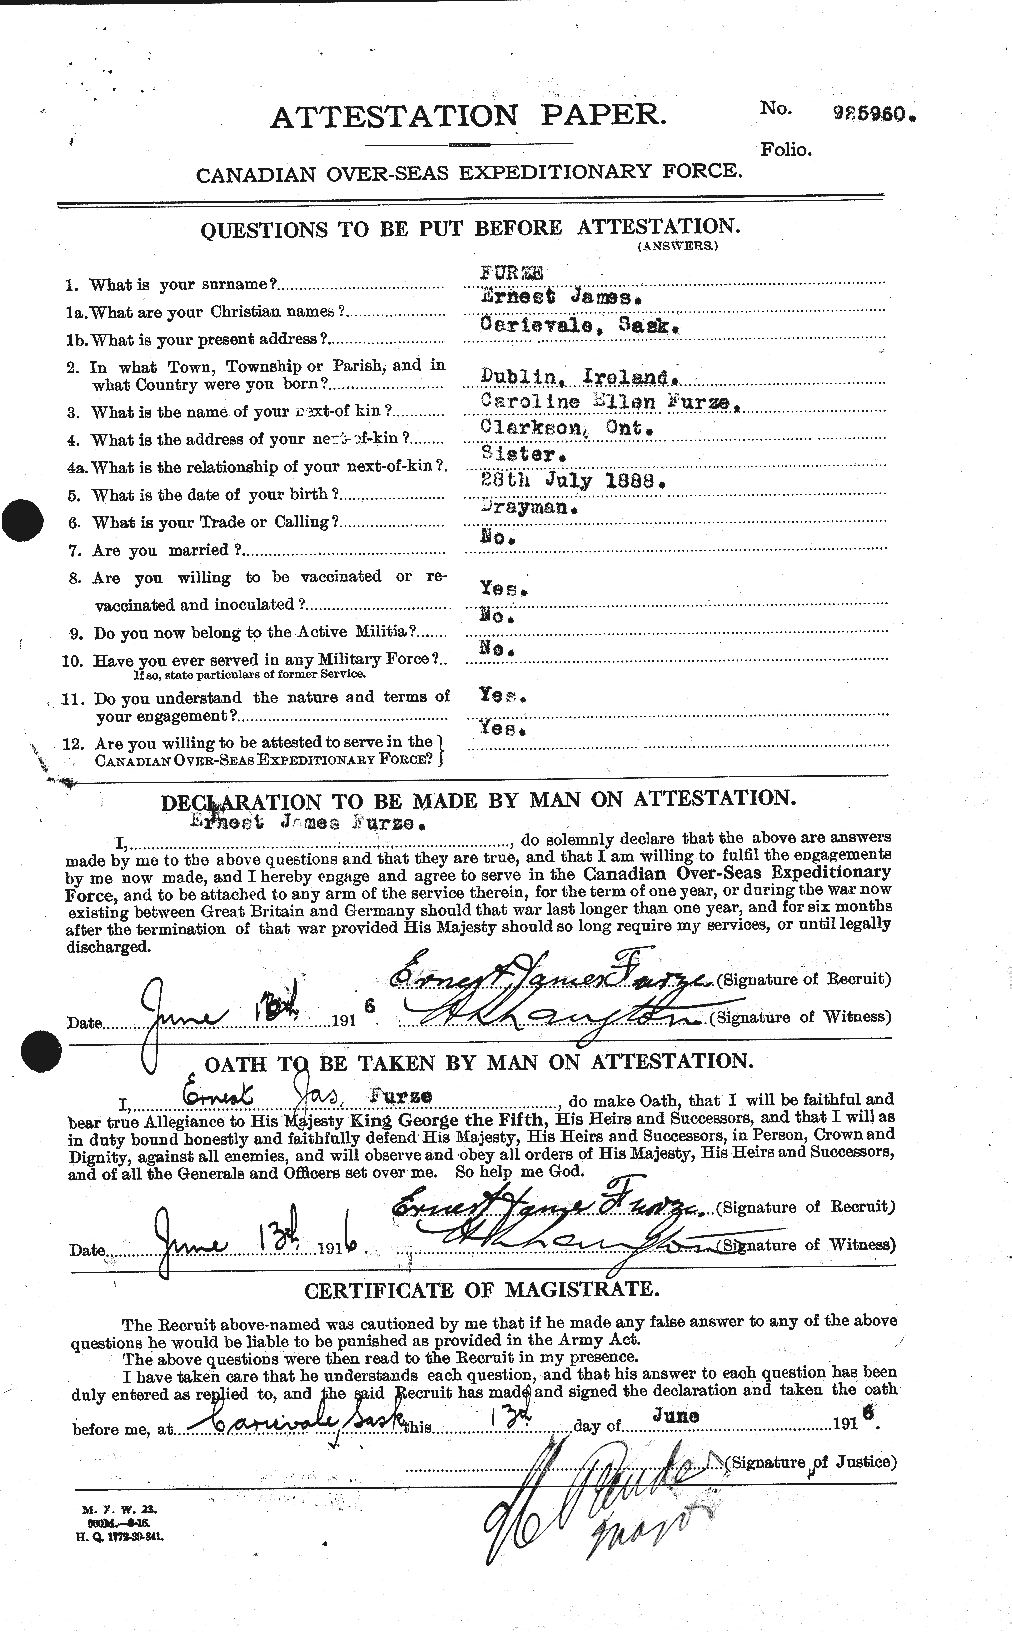 Personnel Records of the First World War - CEF 337727a